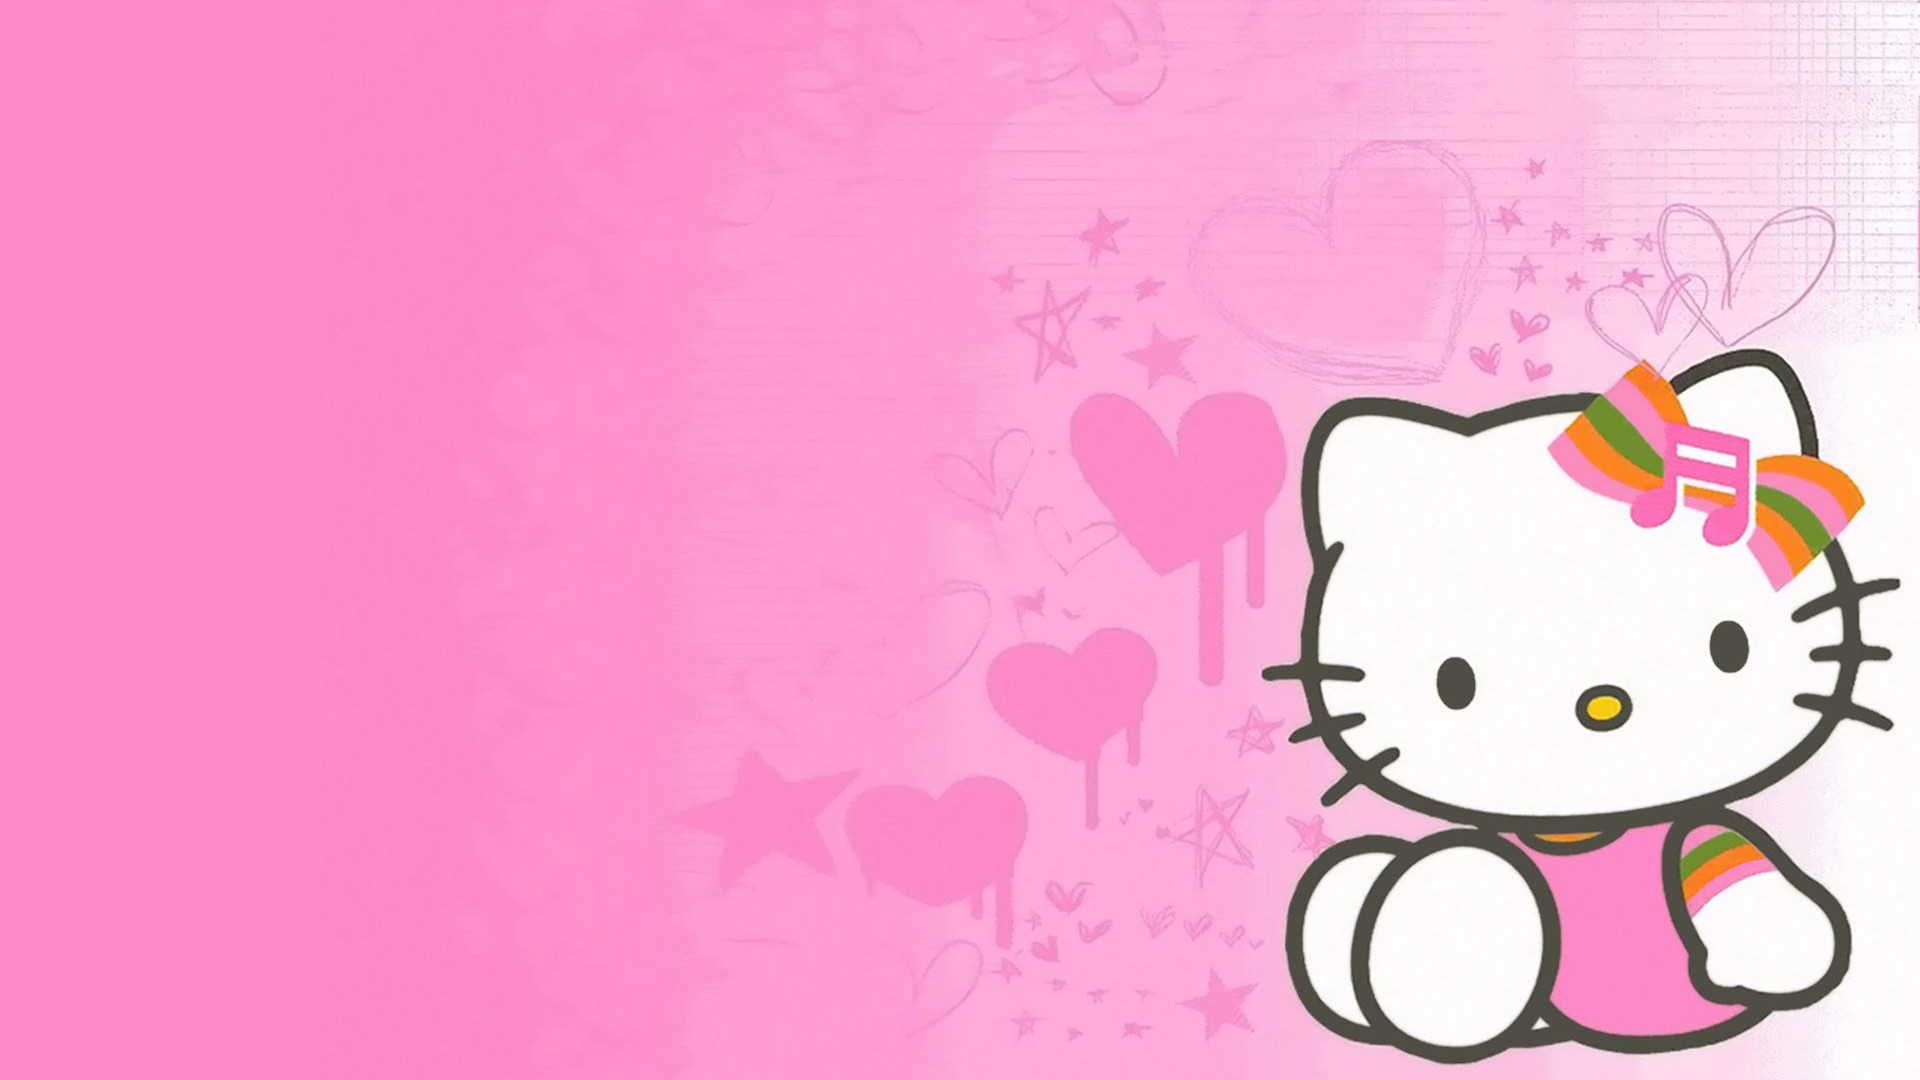 Hello Kitty Images Wallpaper with image resolution 1920x1080 pixel. You can use this wallpaper as background for your desktop Computer Screensavers, Android or iPhone smartphones